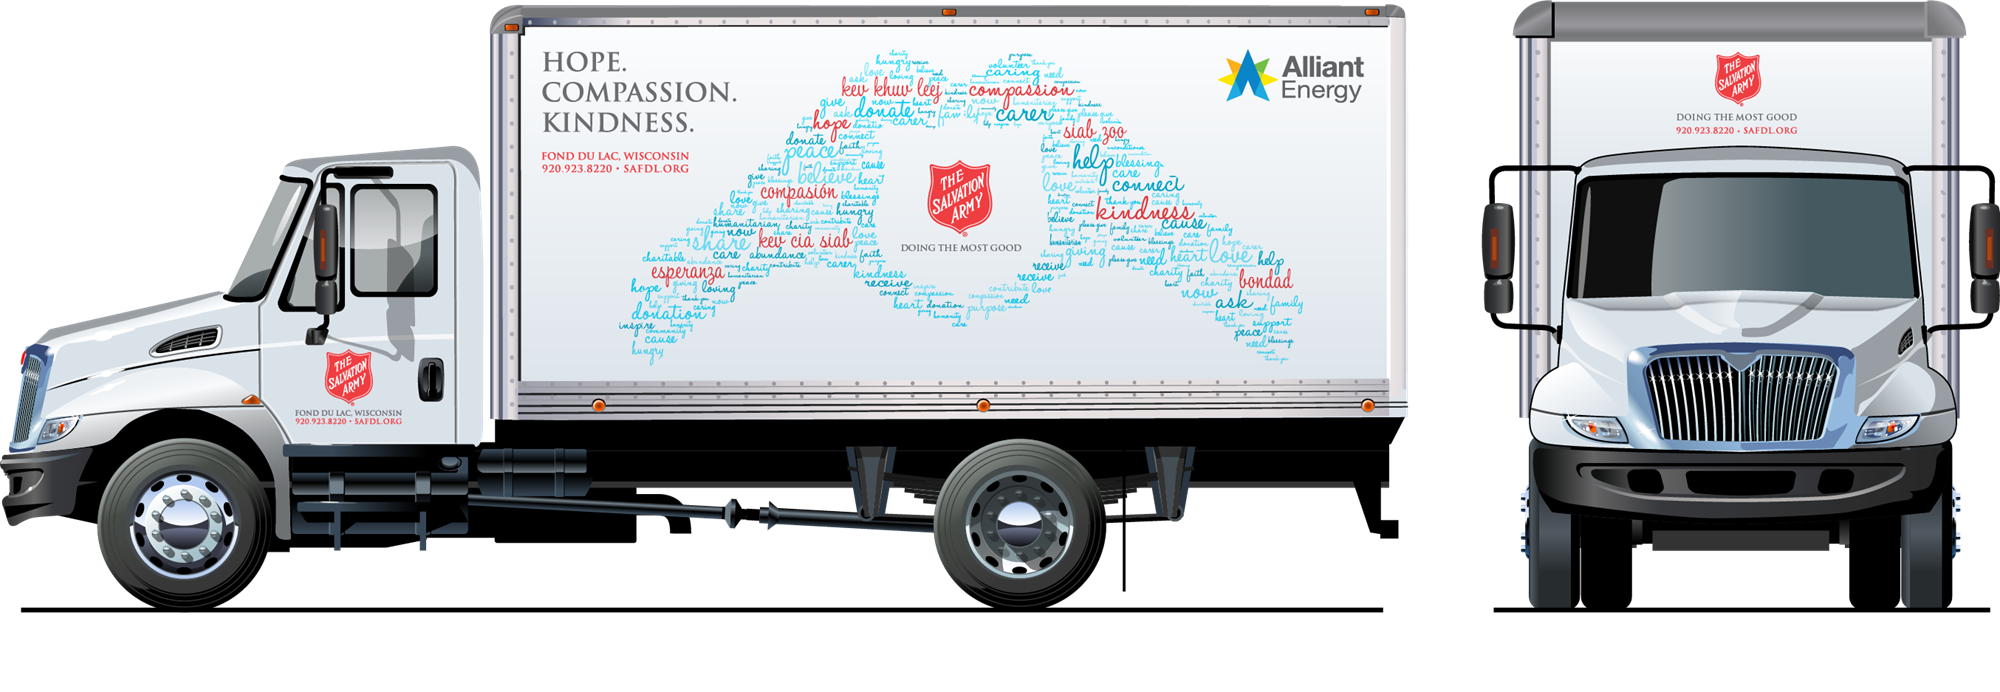 Mockup of Salvation Army truck